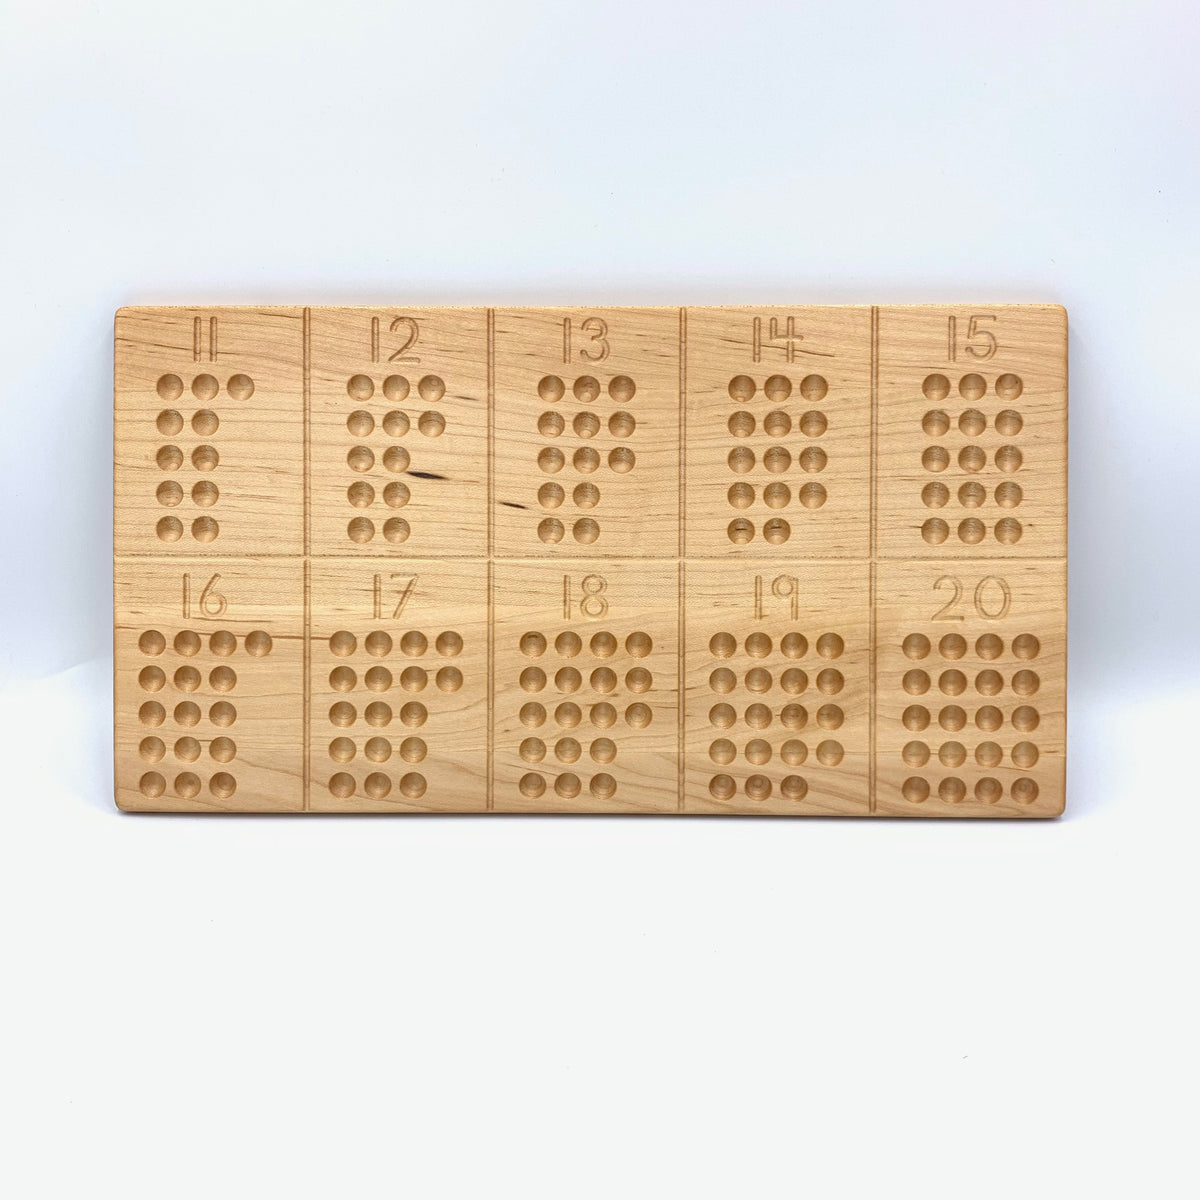 TO BE DISCONTINUED: 11-20 Counting Board